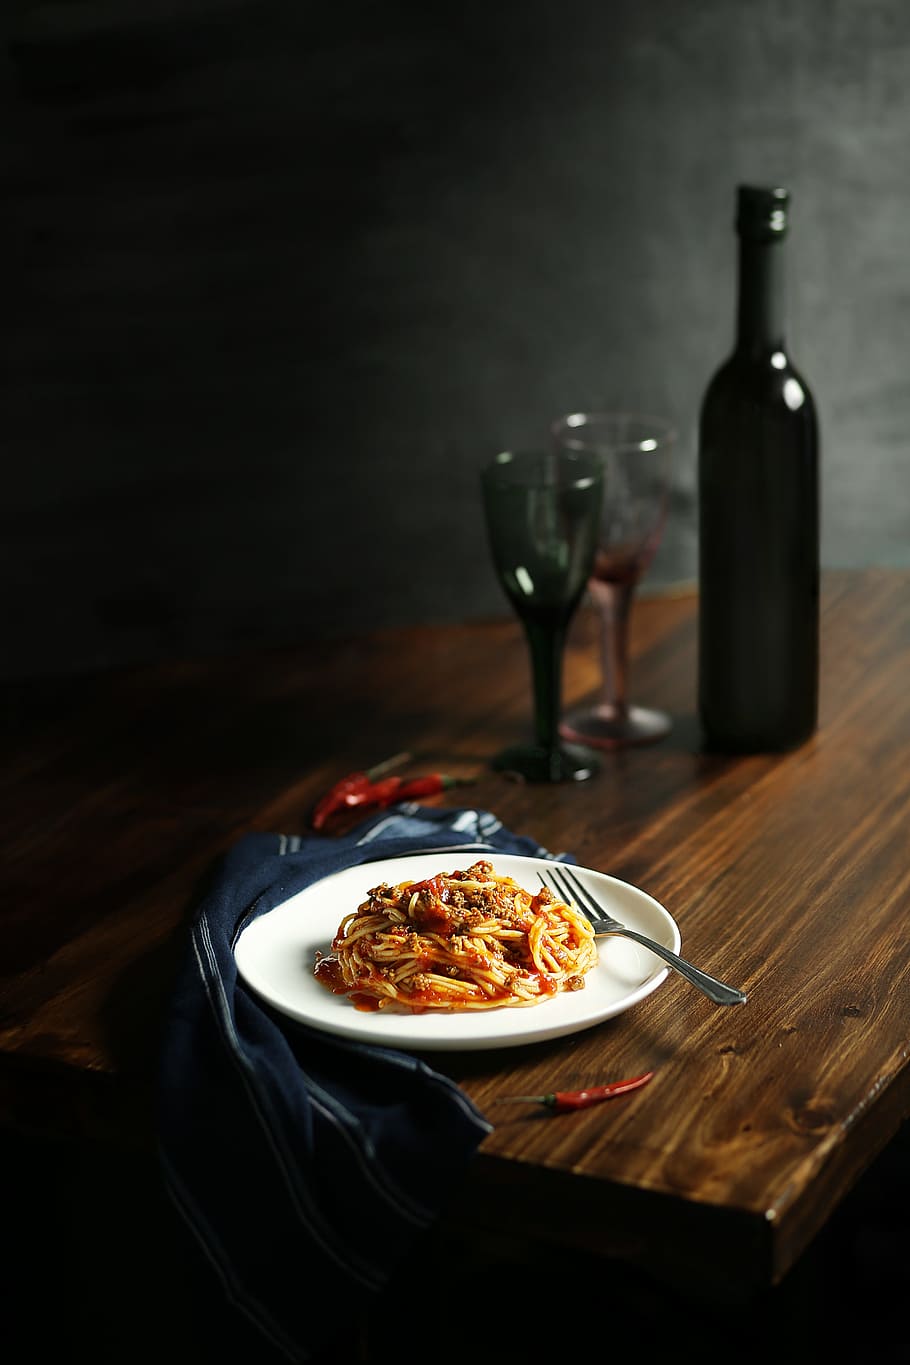 round, white, ceramic, plate, brown, wooden, table, pasta, lunch, breakfast